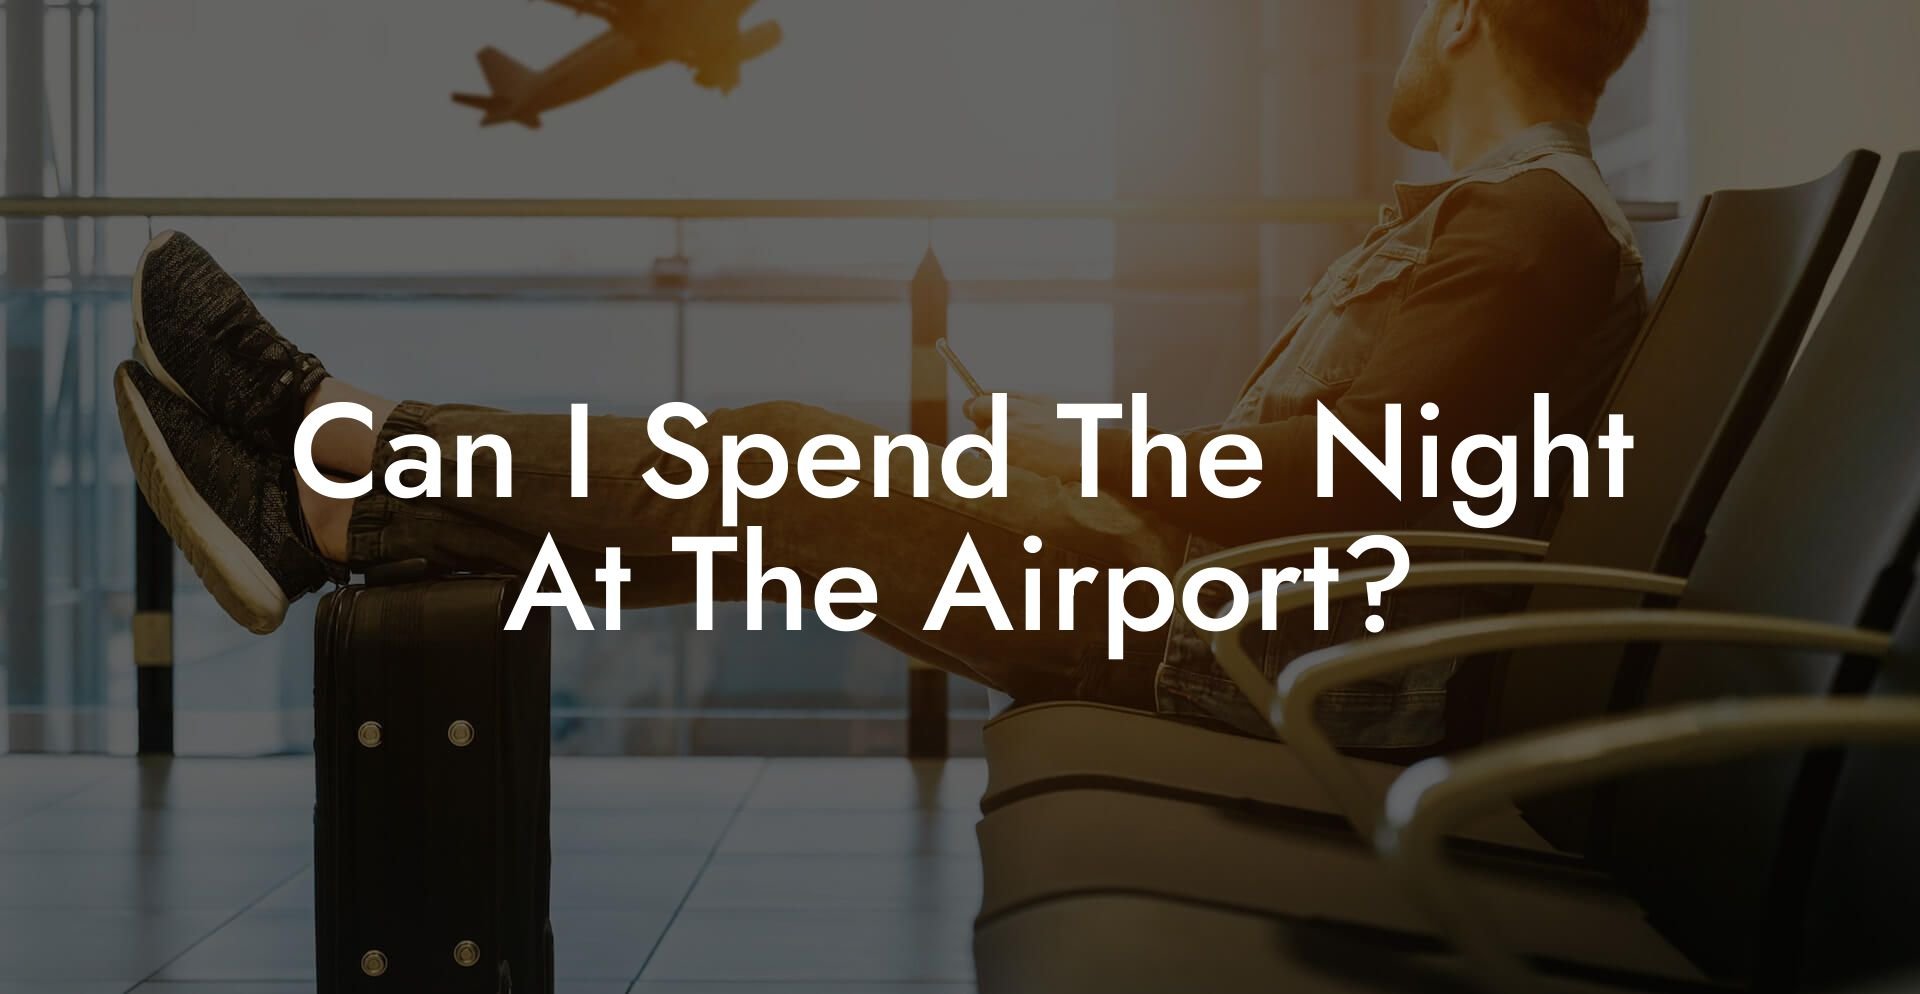 Can I Spend The Night At The Airport?